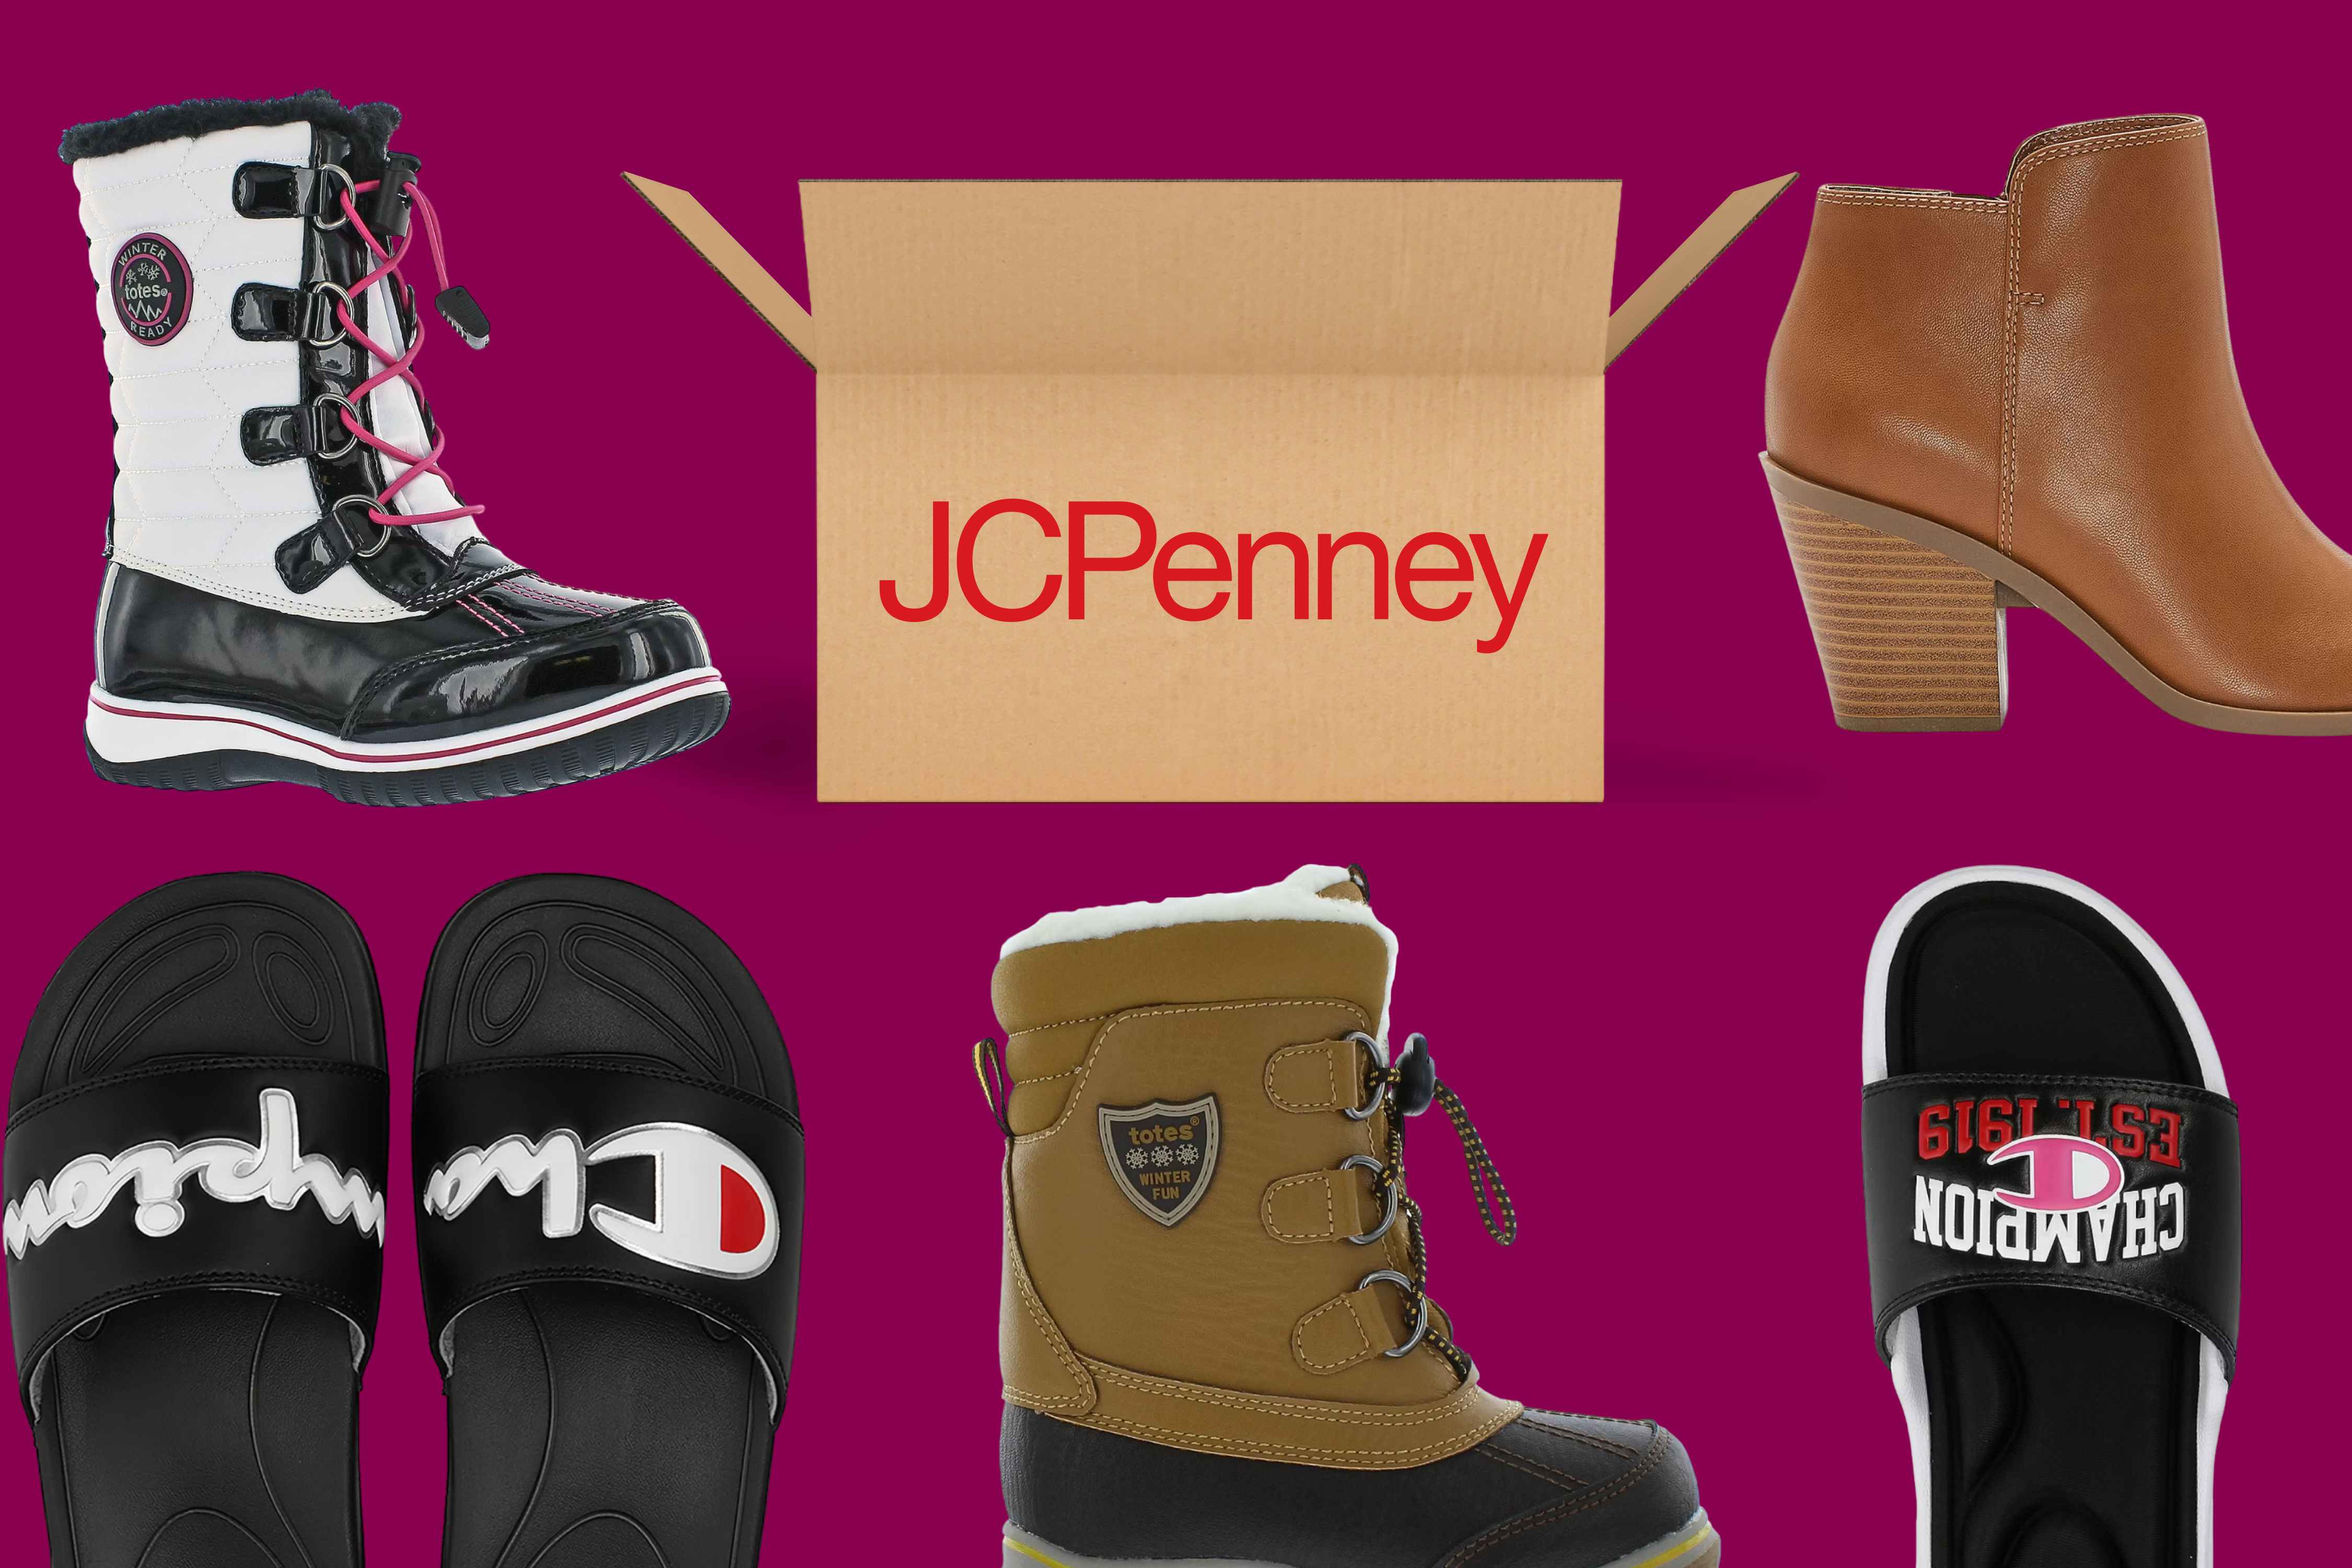 Shoe Clearance at JCPenney: $12 Champion Slides, $38 Adidas, and More